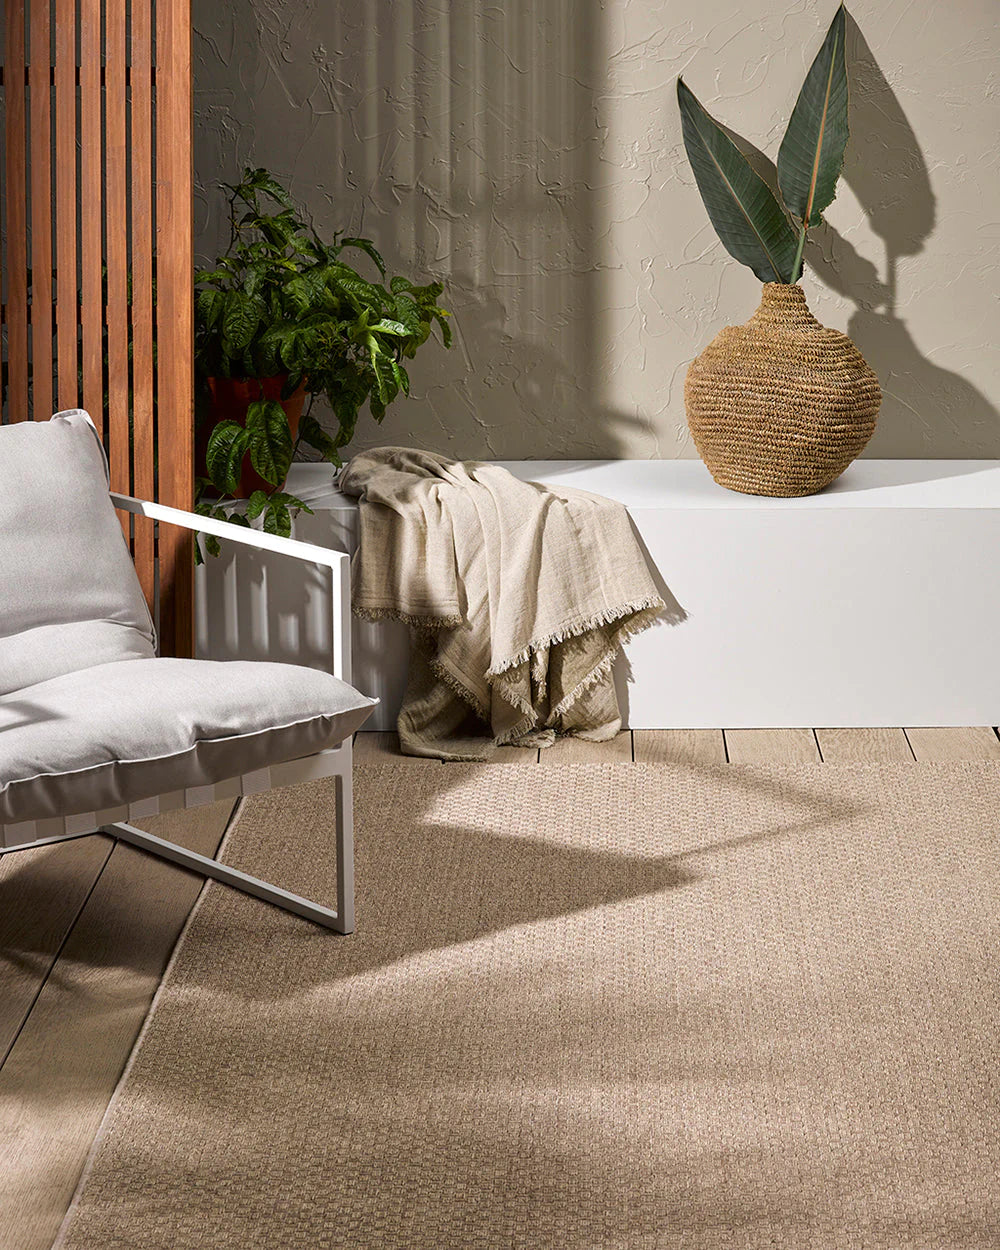 Flax Sand Outdoor Floor Rug from Baya Furtex Stockist Make Your House A Home, Furniture Store Bendigo. Free Australia Wide Delivery.